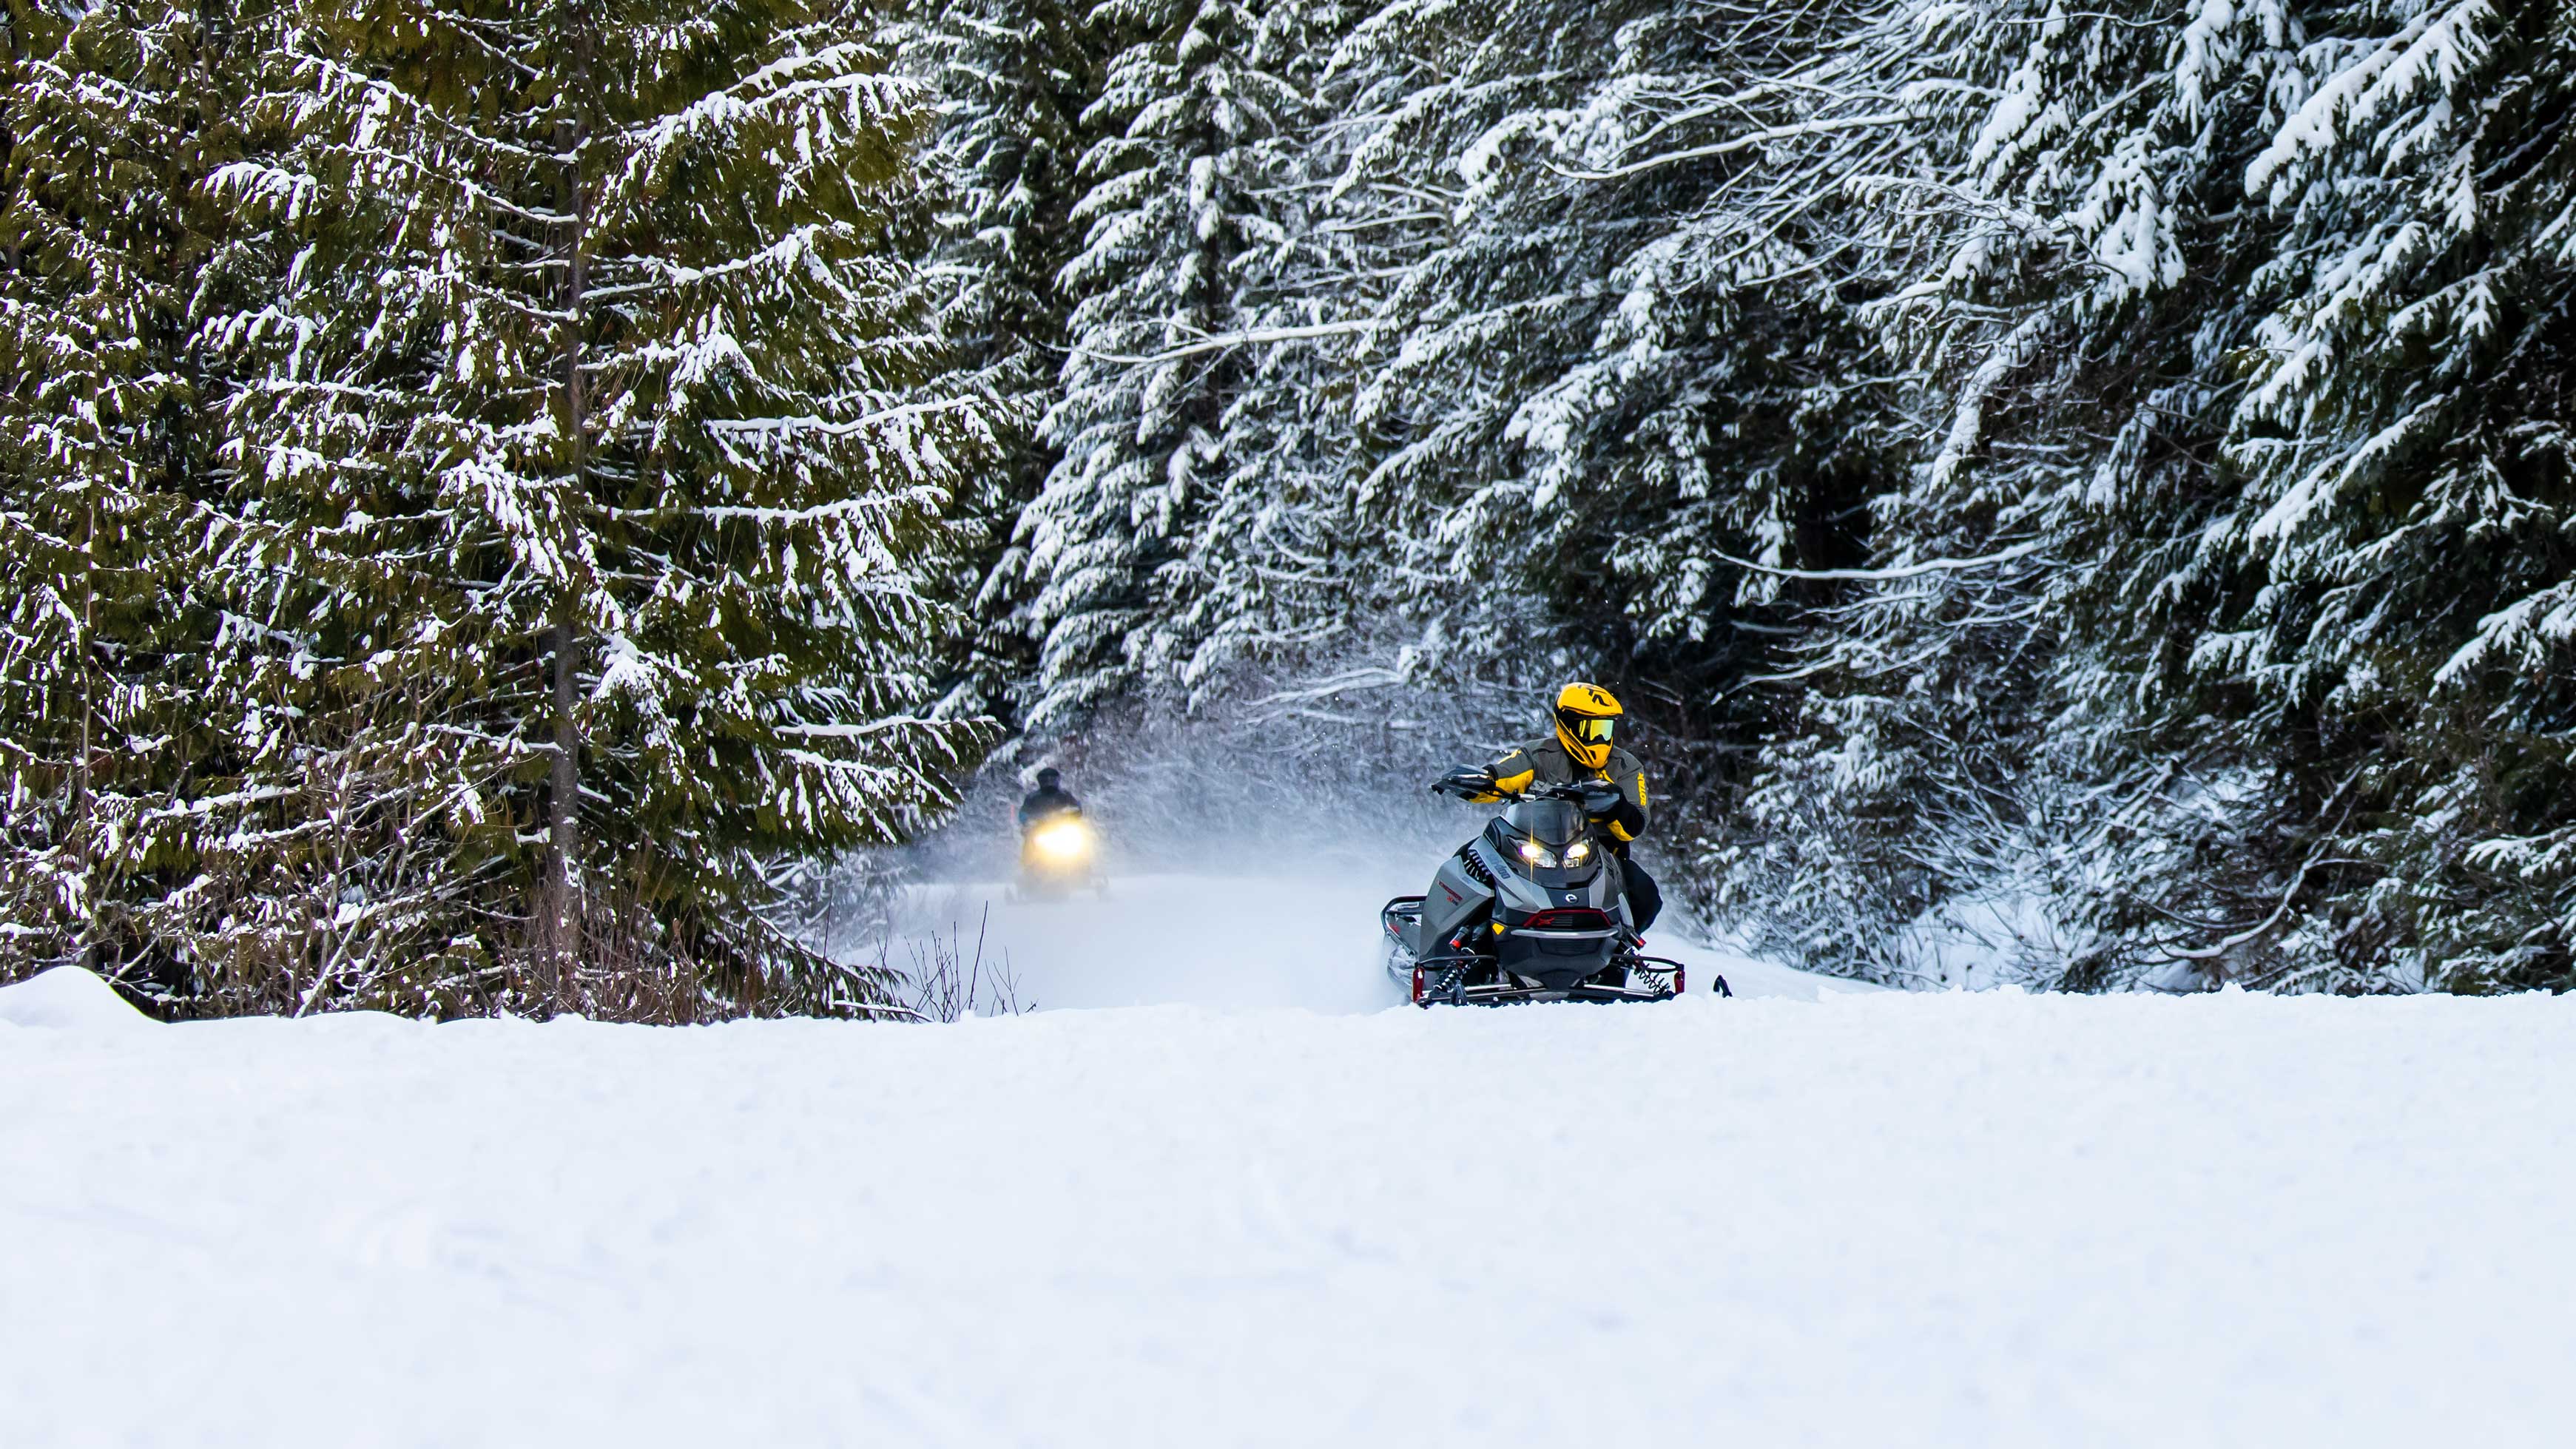 Two Ski-Doo snowmobilers riding in trail